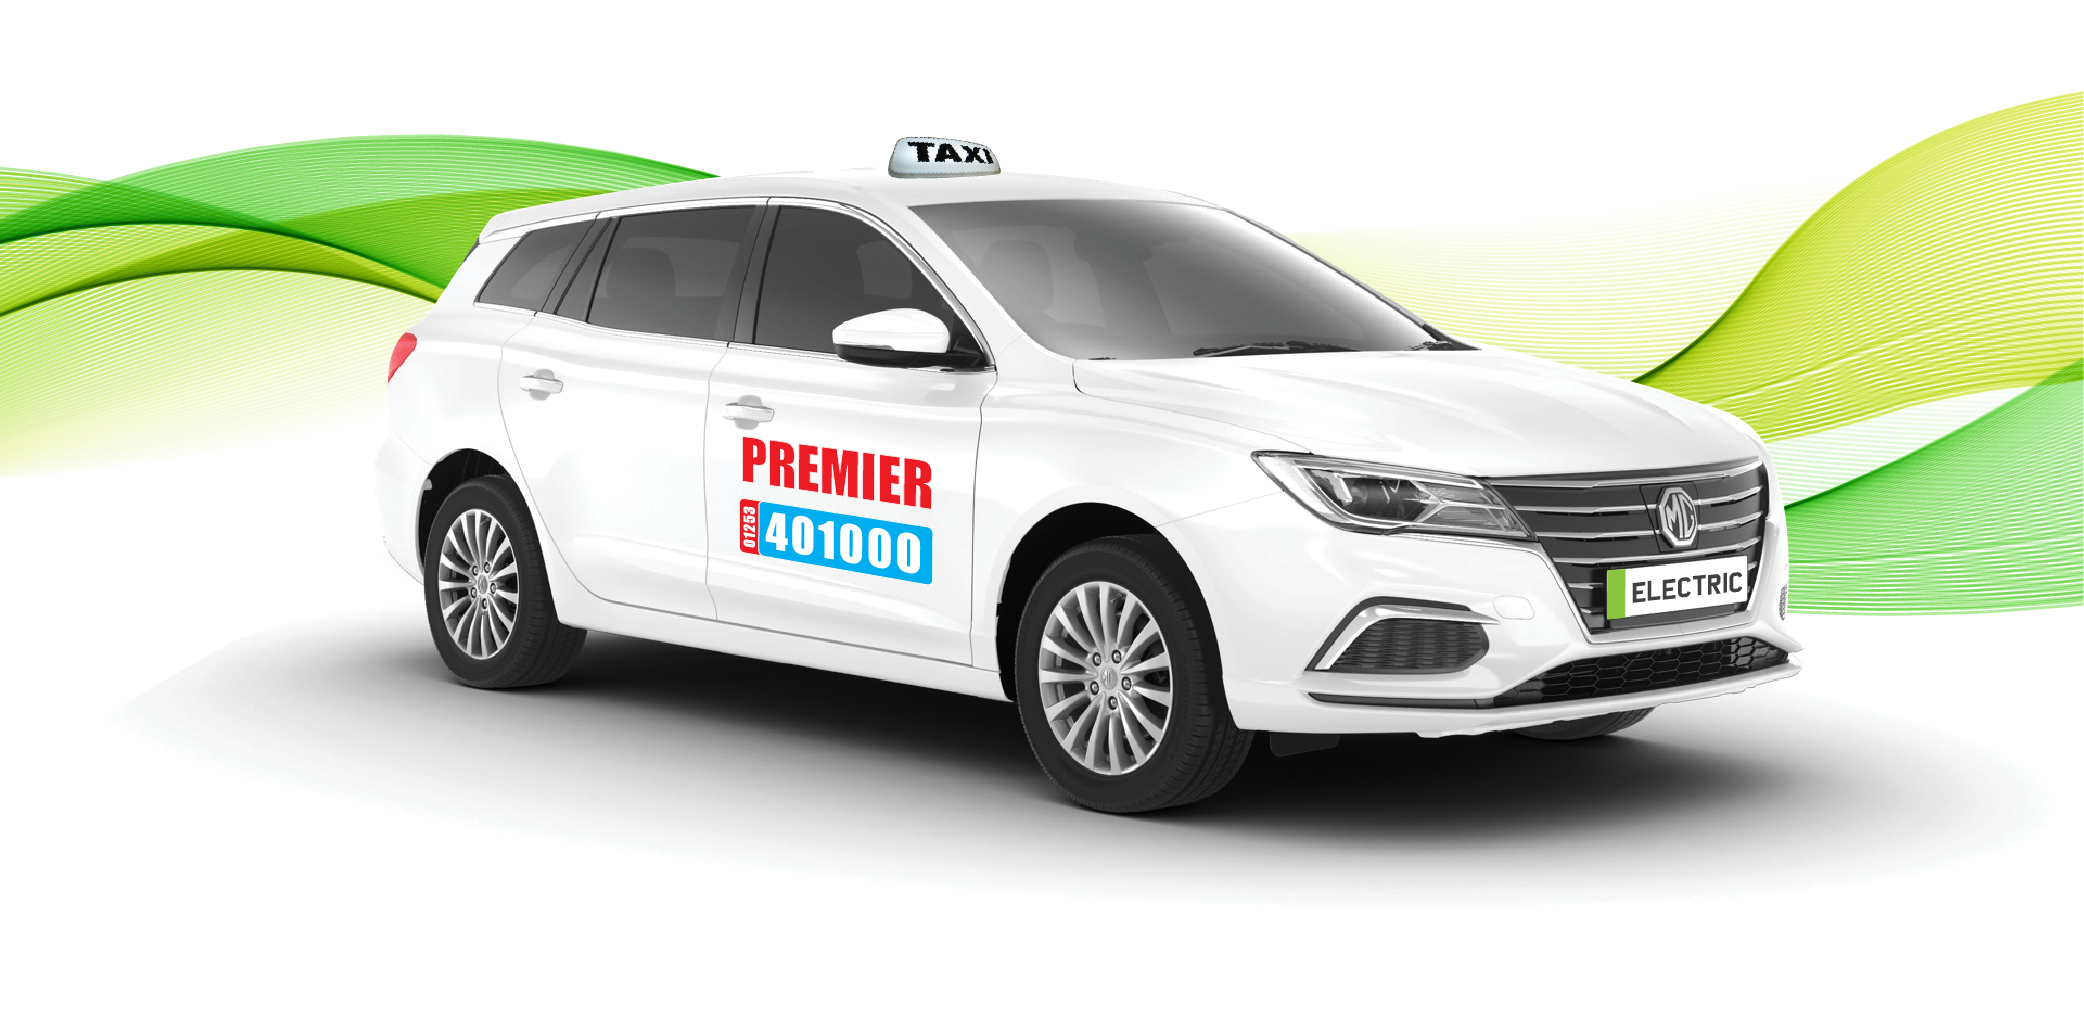 Premier Taxi at St Annes Train Station